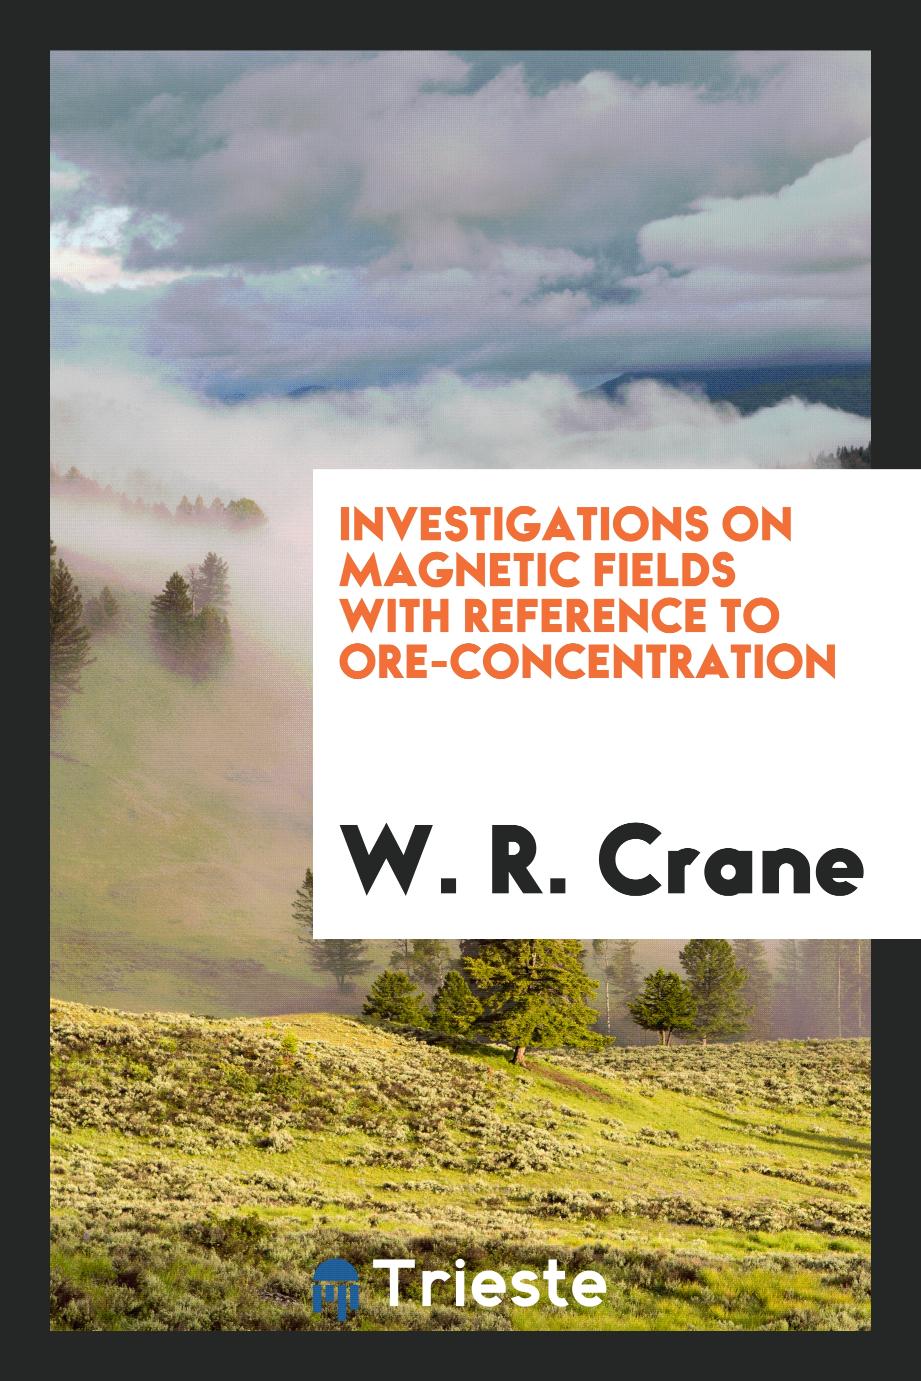 Investigations on Magnetic Fields with Reference to Ore-concentration